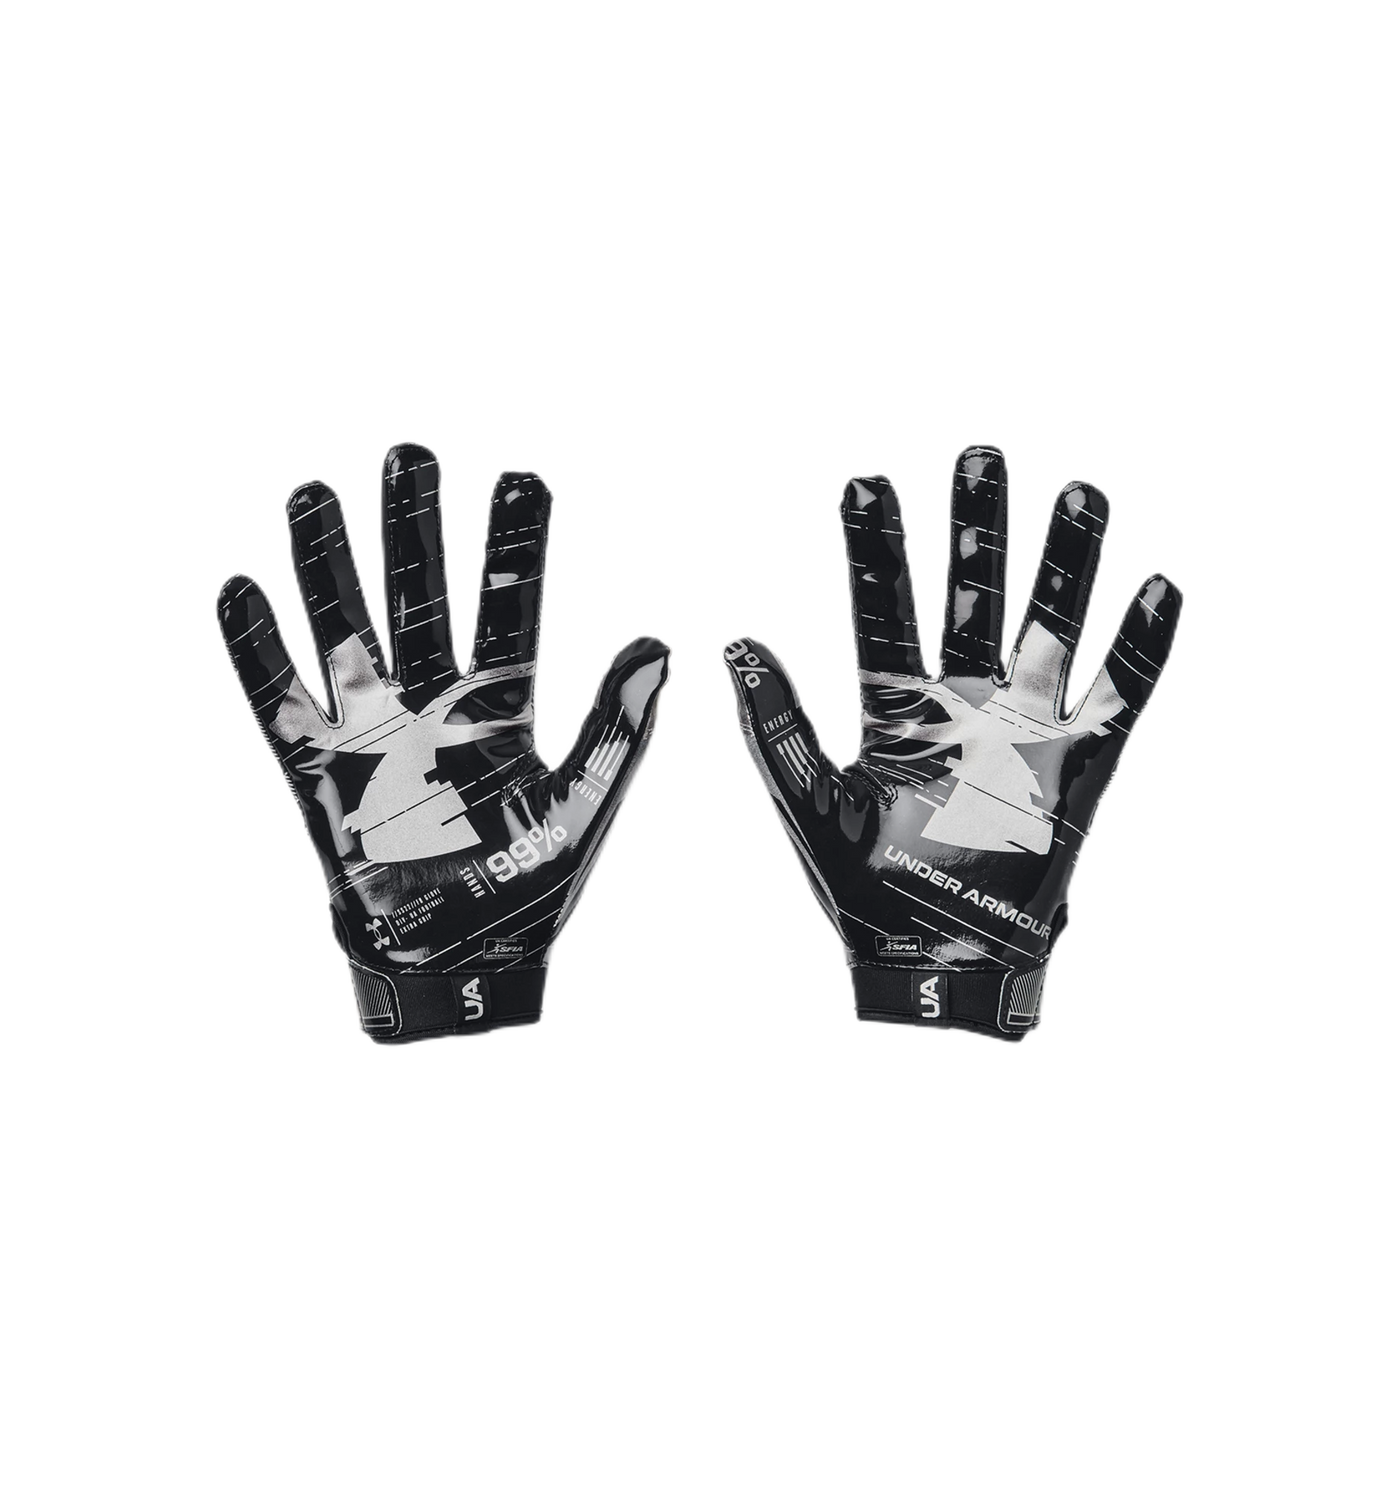 Under Armour F8 - Premium Football Gloves from Under Armour - Shop now at Reyrr Athletics